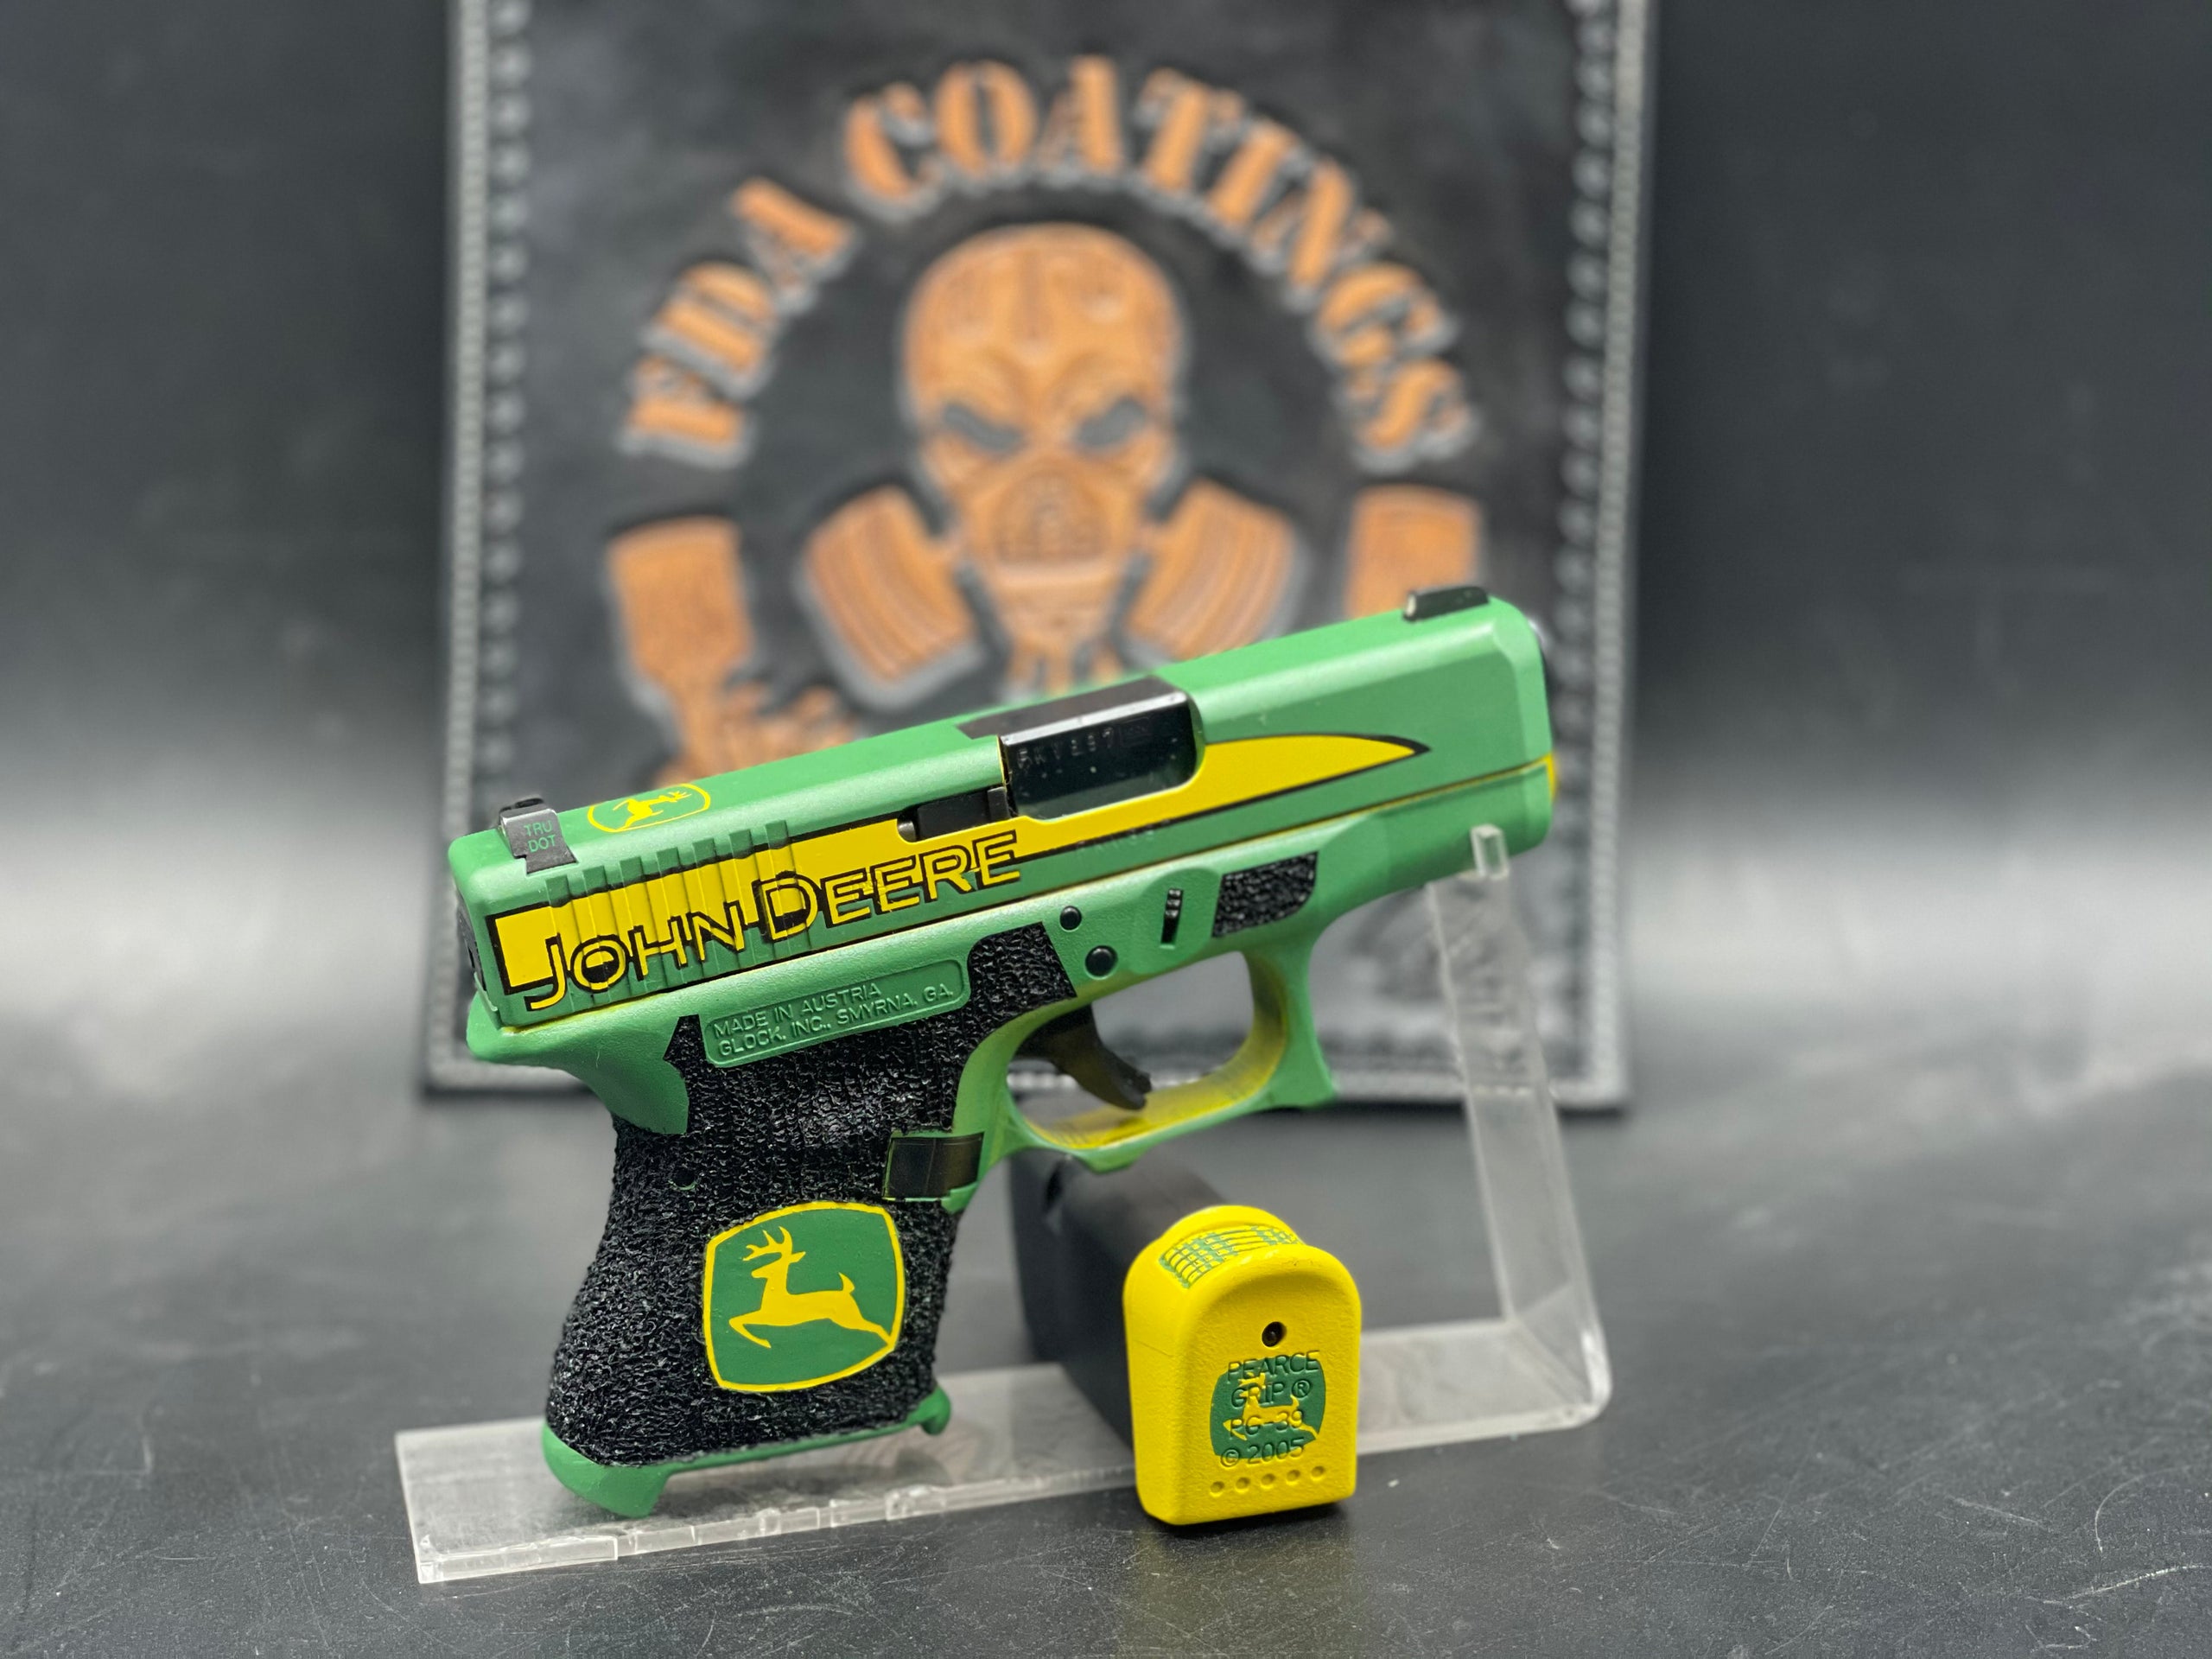 Get a Quote for An Amazing Cerakote Finish On Your Pistol Now